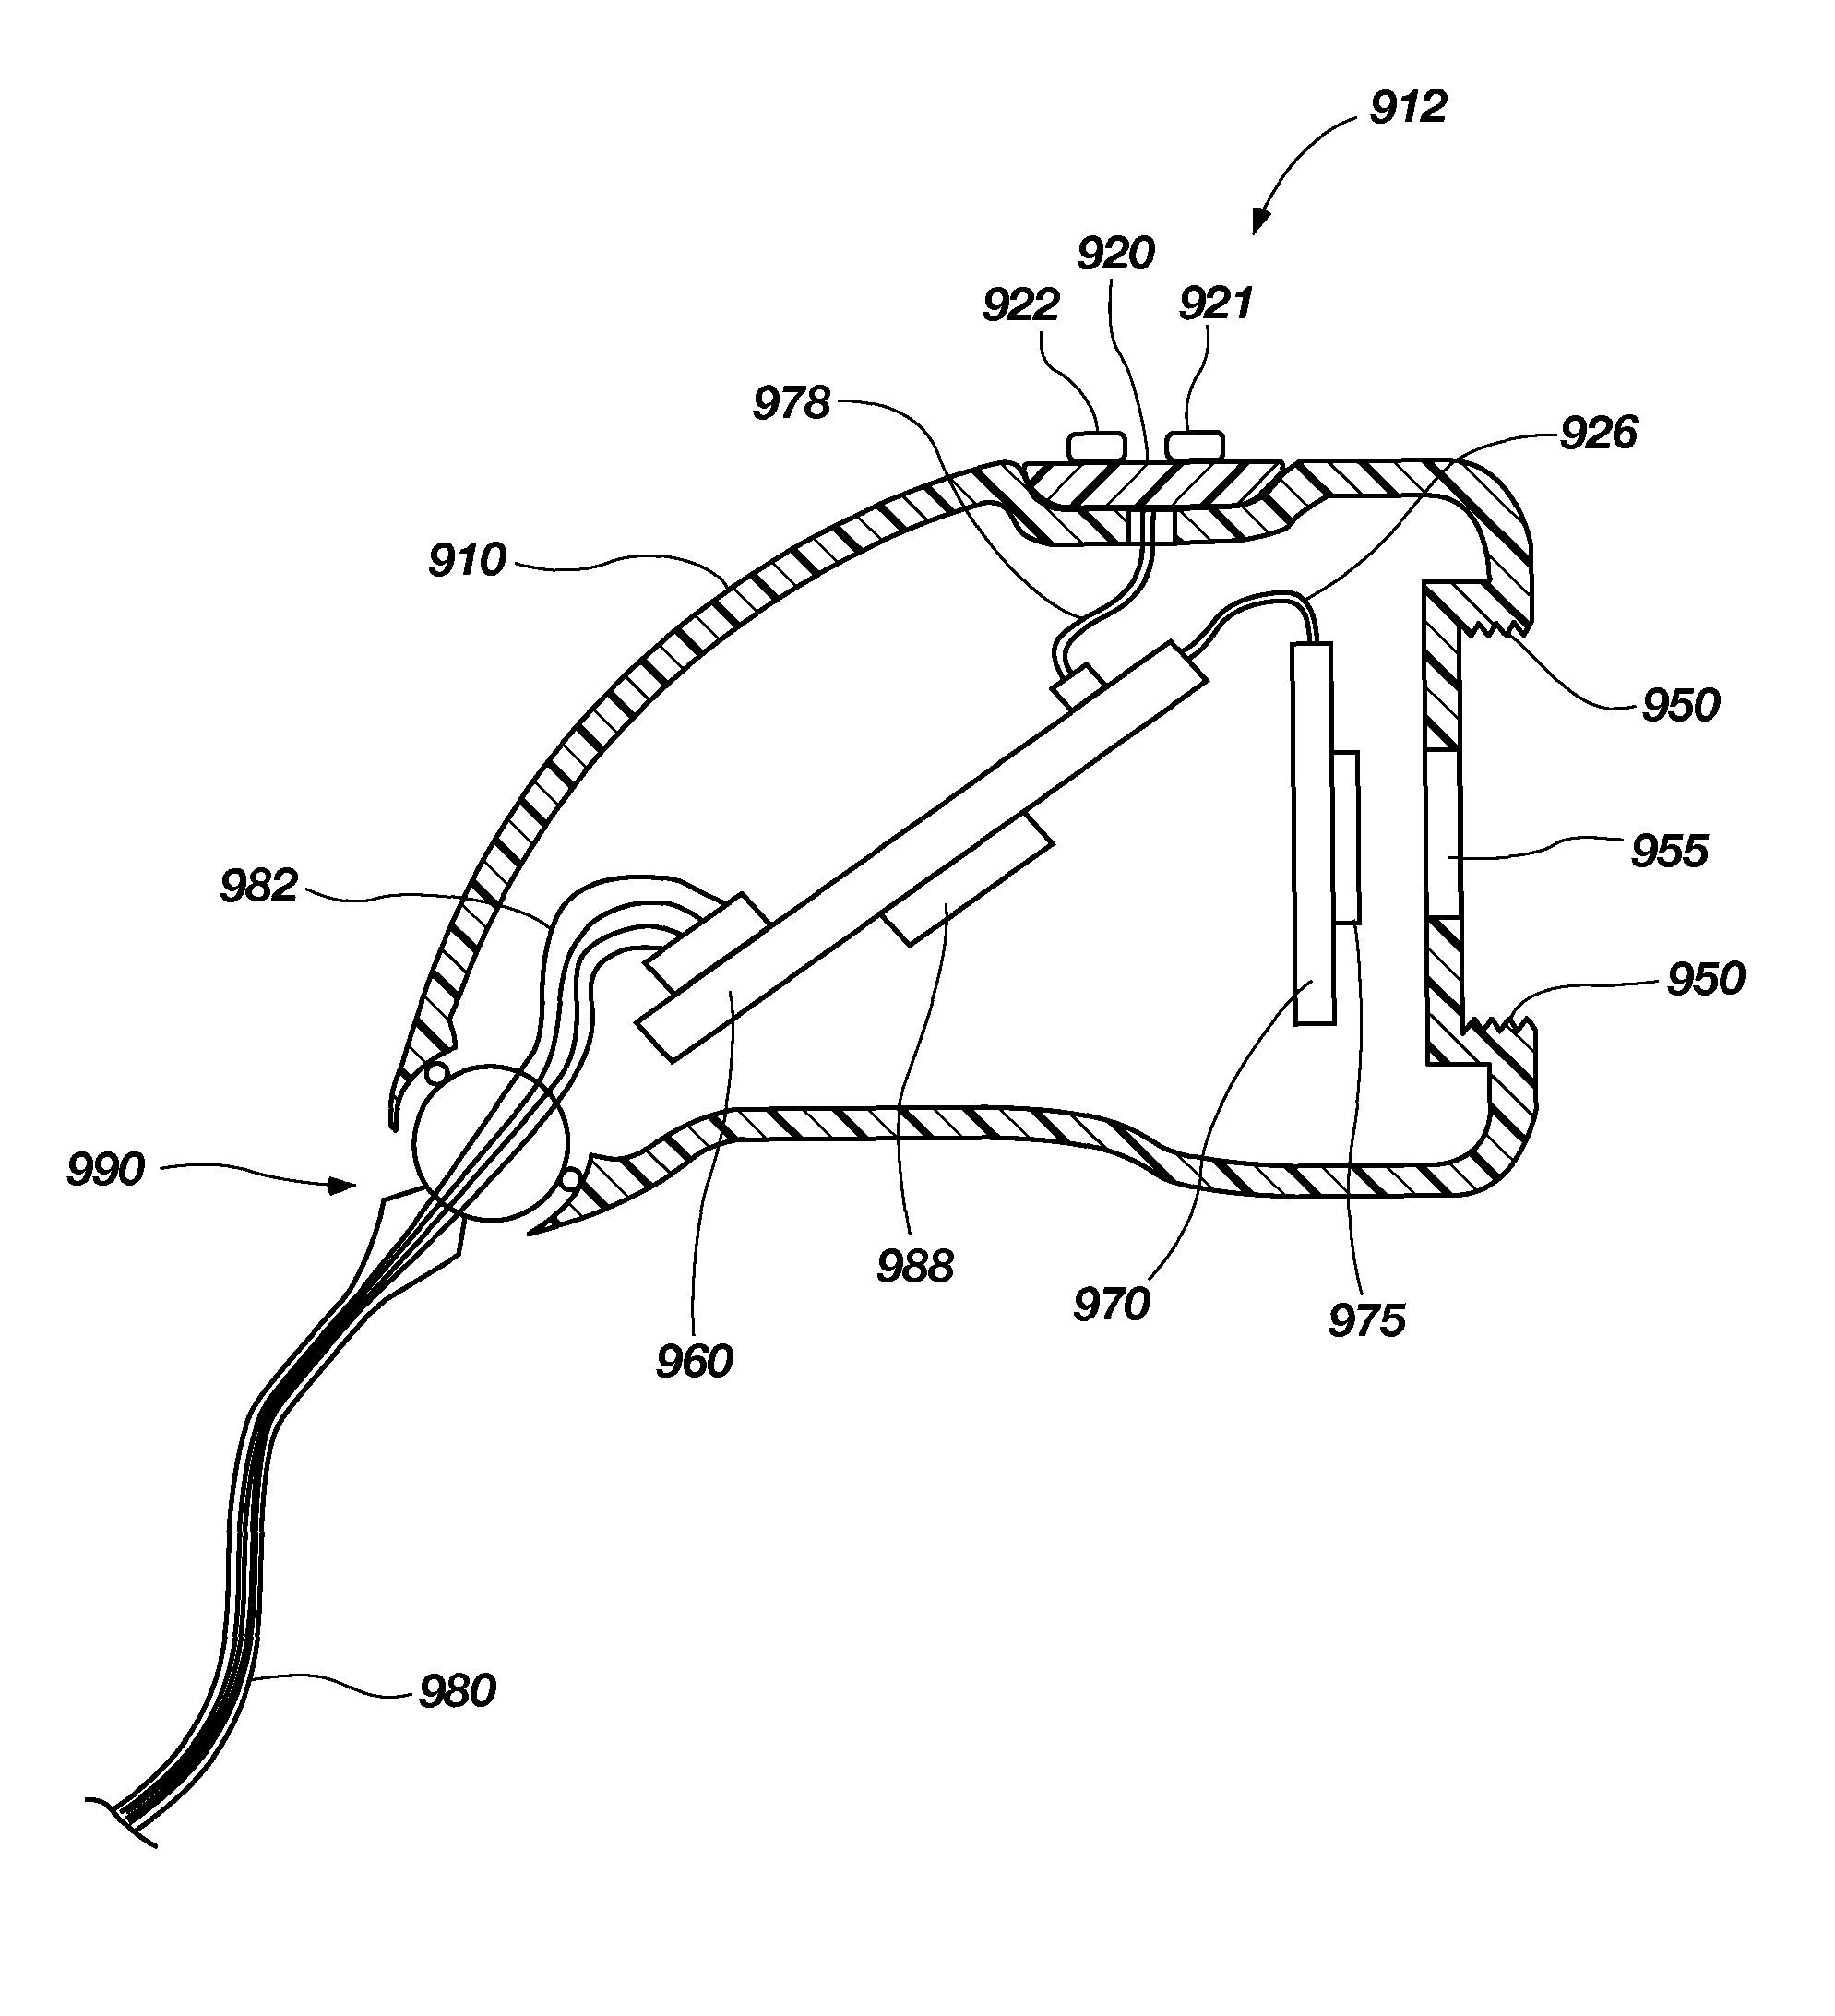 System, apparatus and methods for providing a single use imaging device for sterile environments